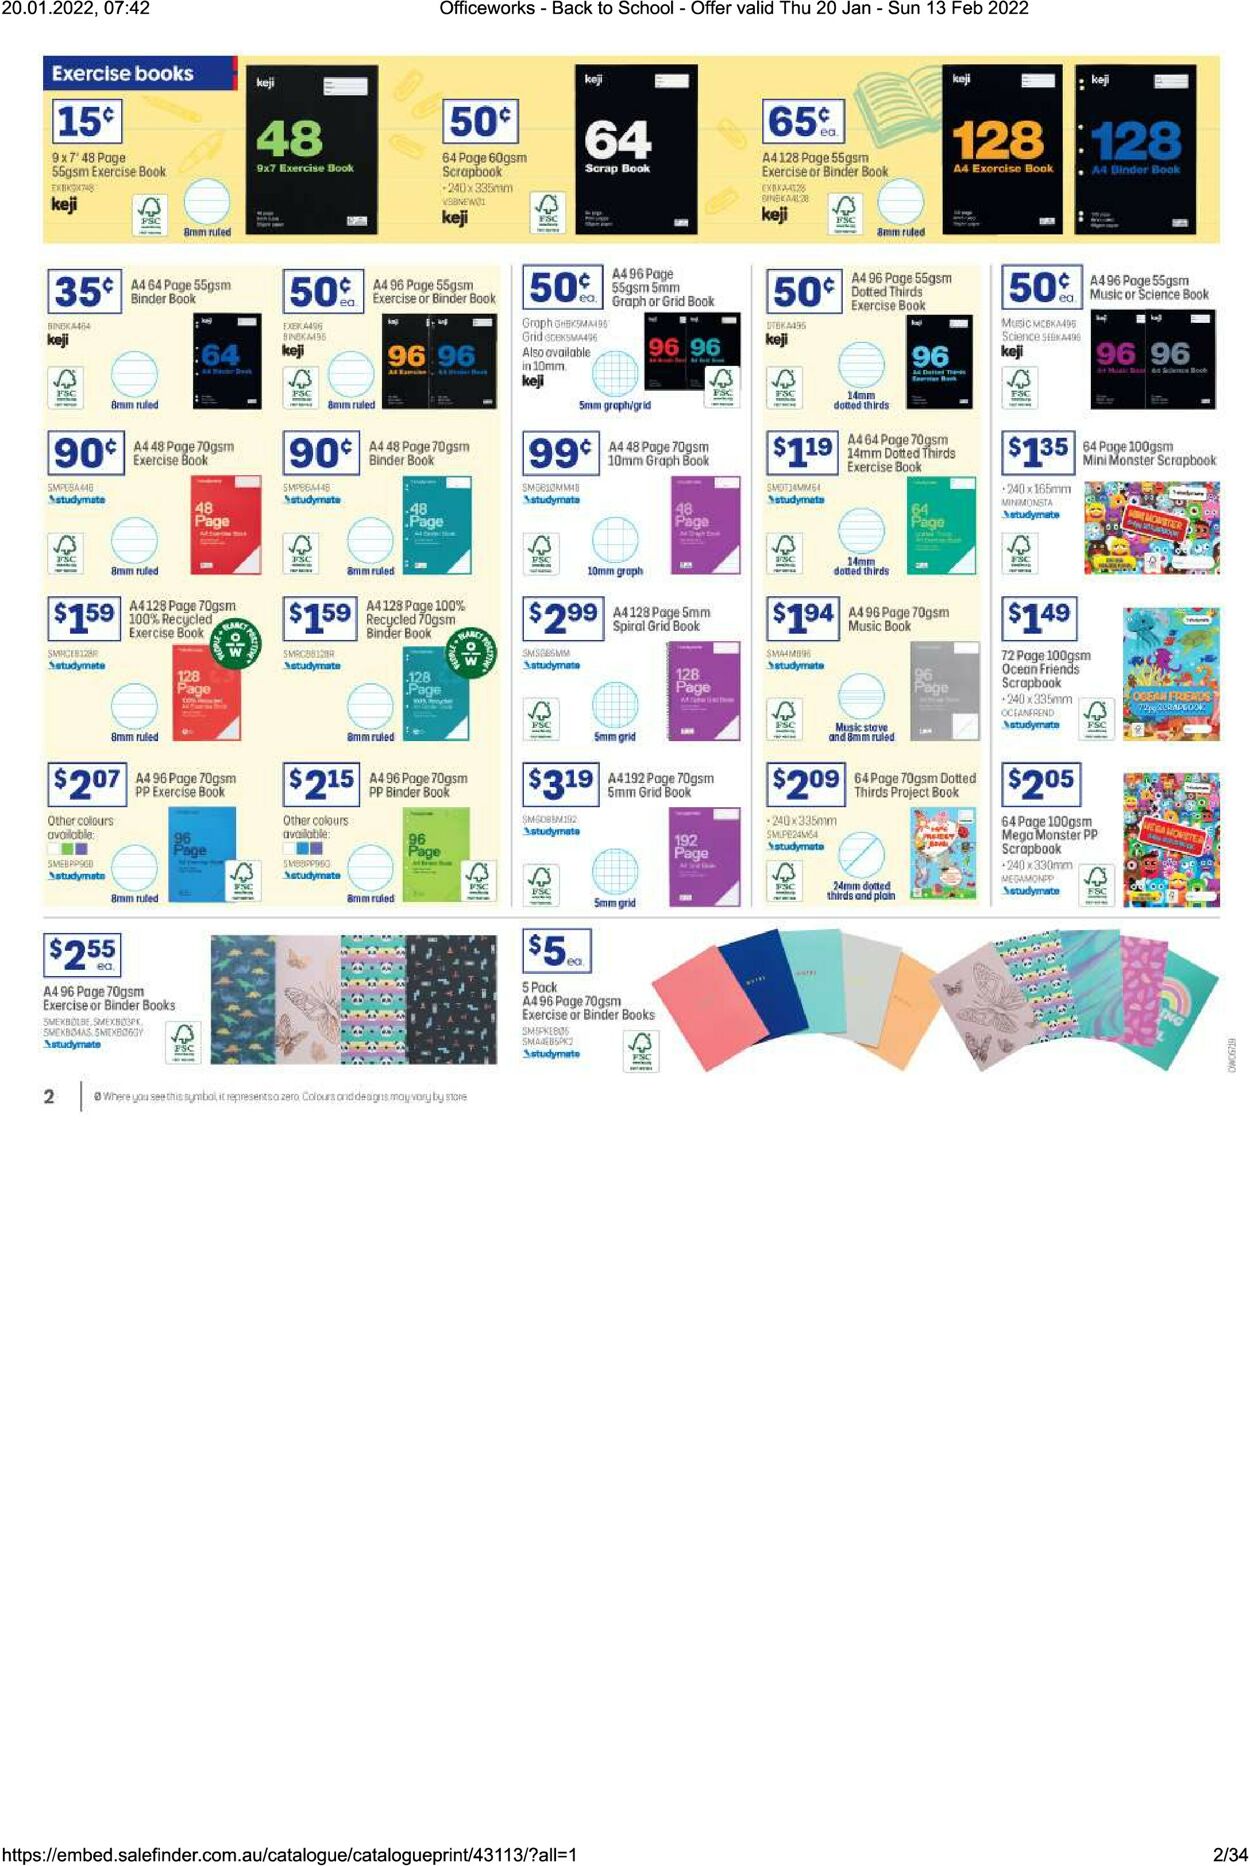 Catalogue Officeworks 20.01.2022 - 13.02.2022